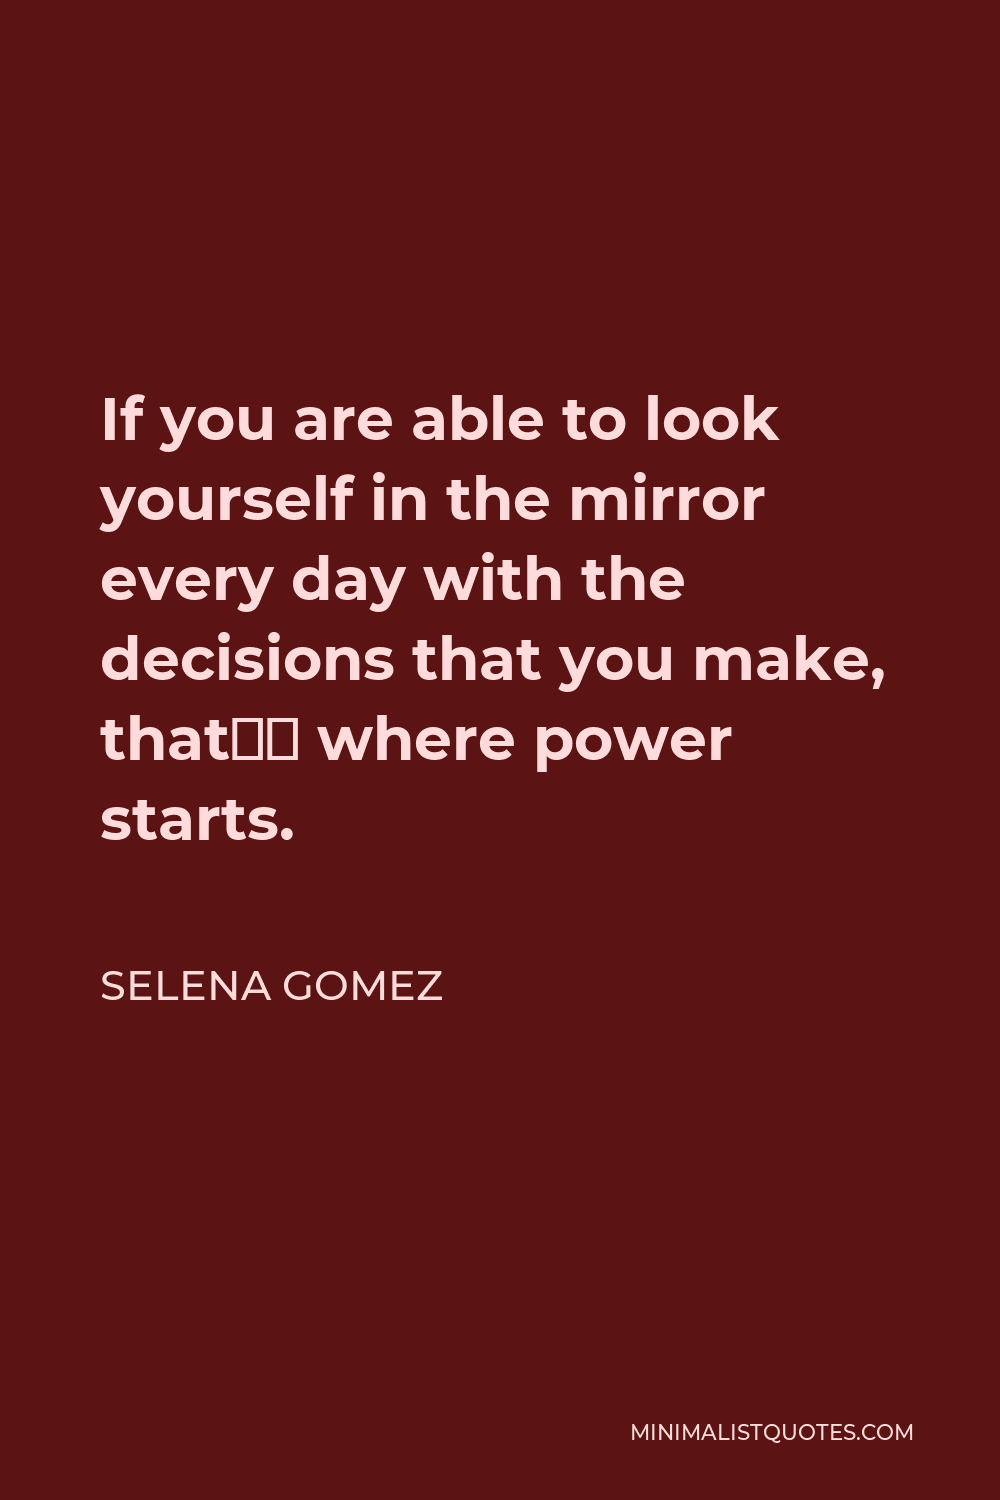 Selena Gomez Quote - If you are able to look yourself in the mirror every day with the decisions that you make, that’s where power starts.